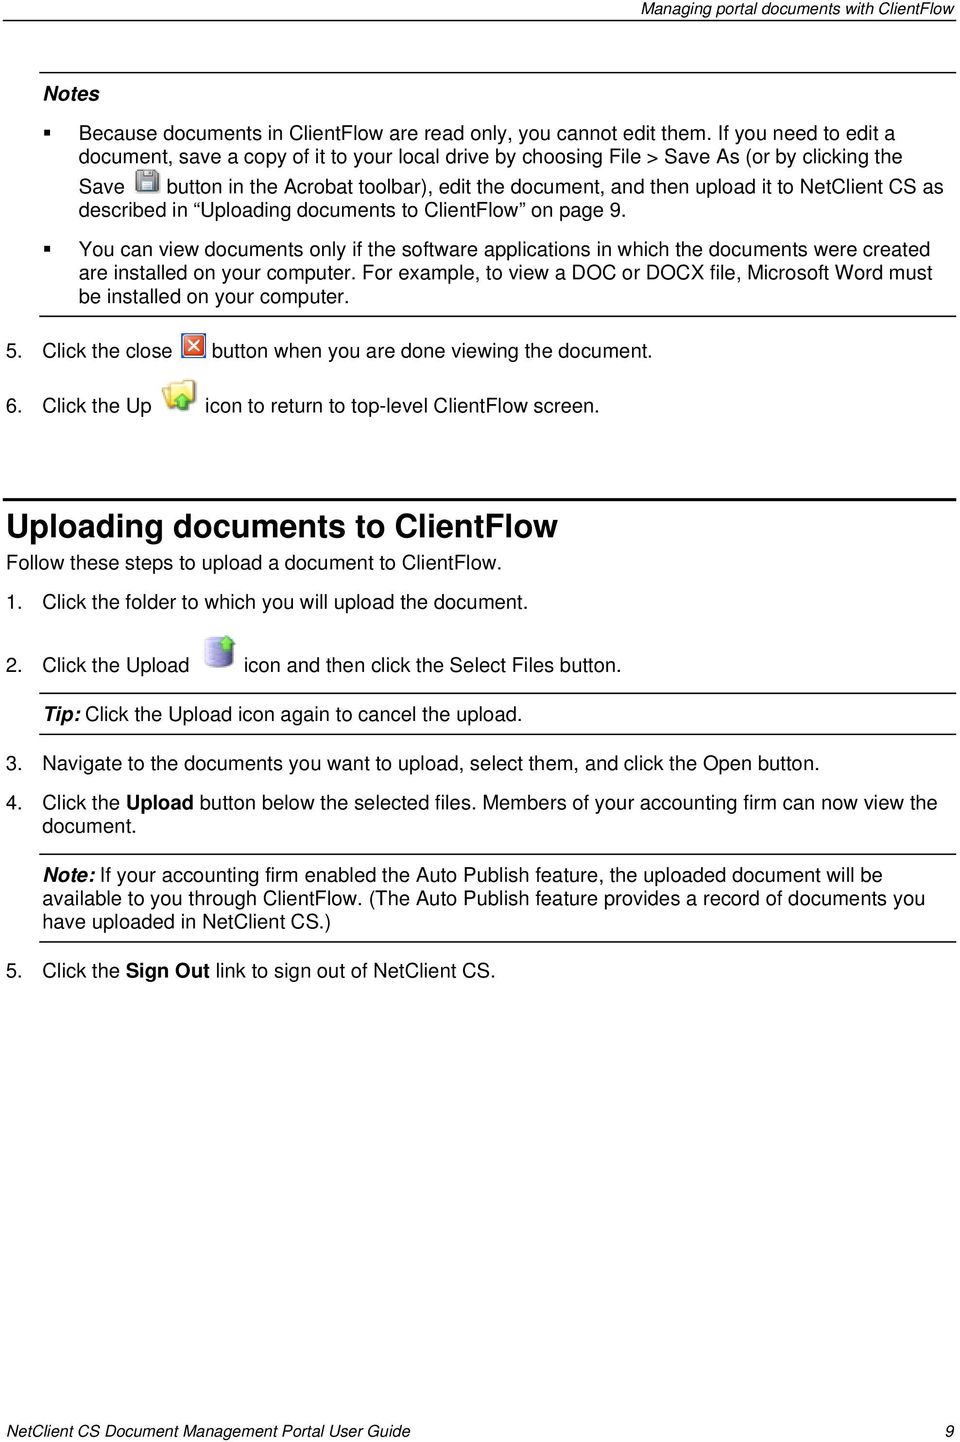 NetClient CS as described in Uploading documents to ClientFlow on page 9. You can view documents only if the software applications in which the documents were created are installed on your computer.